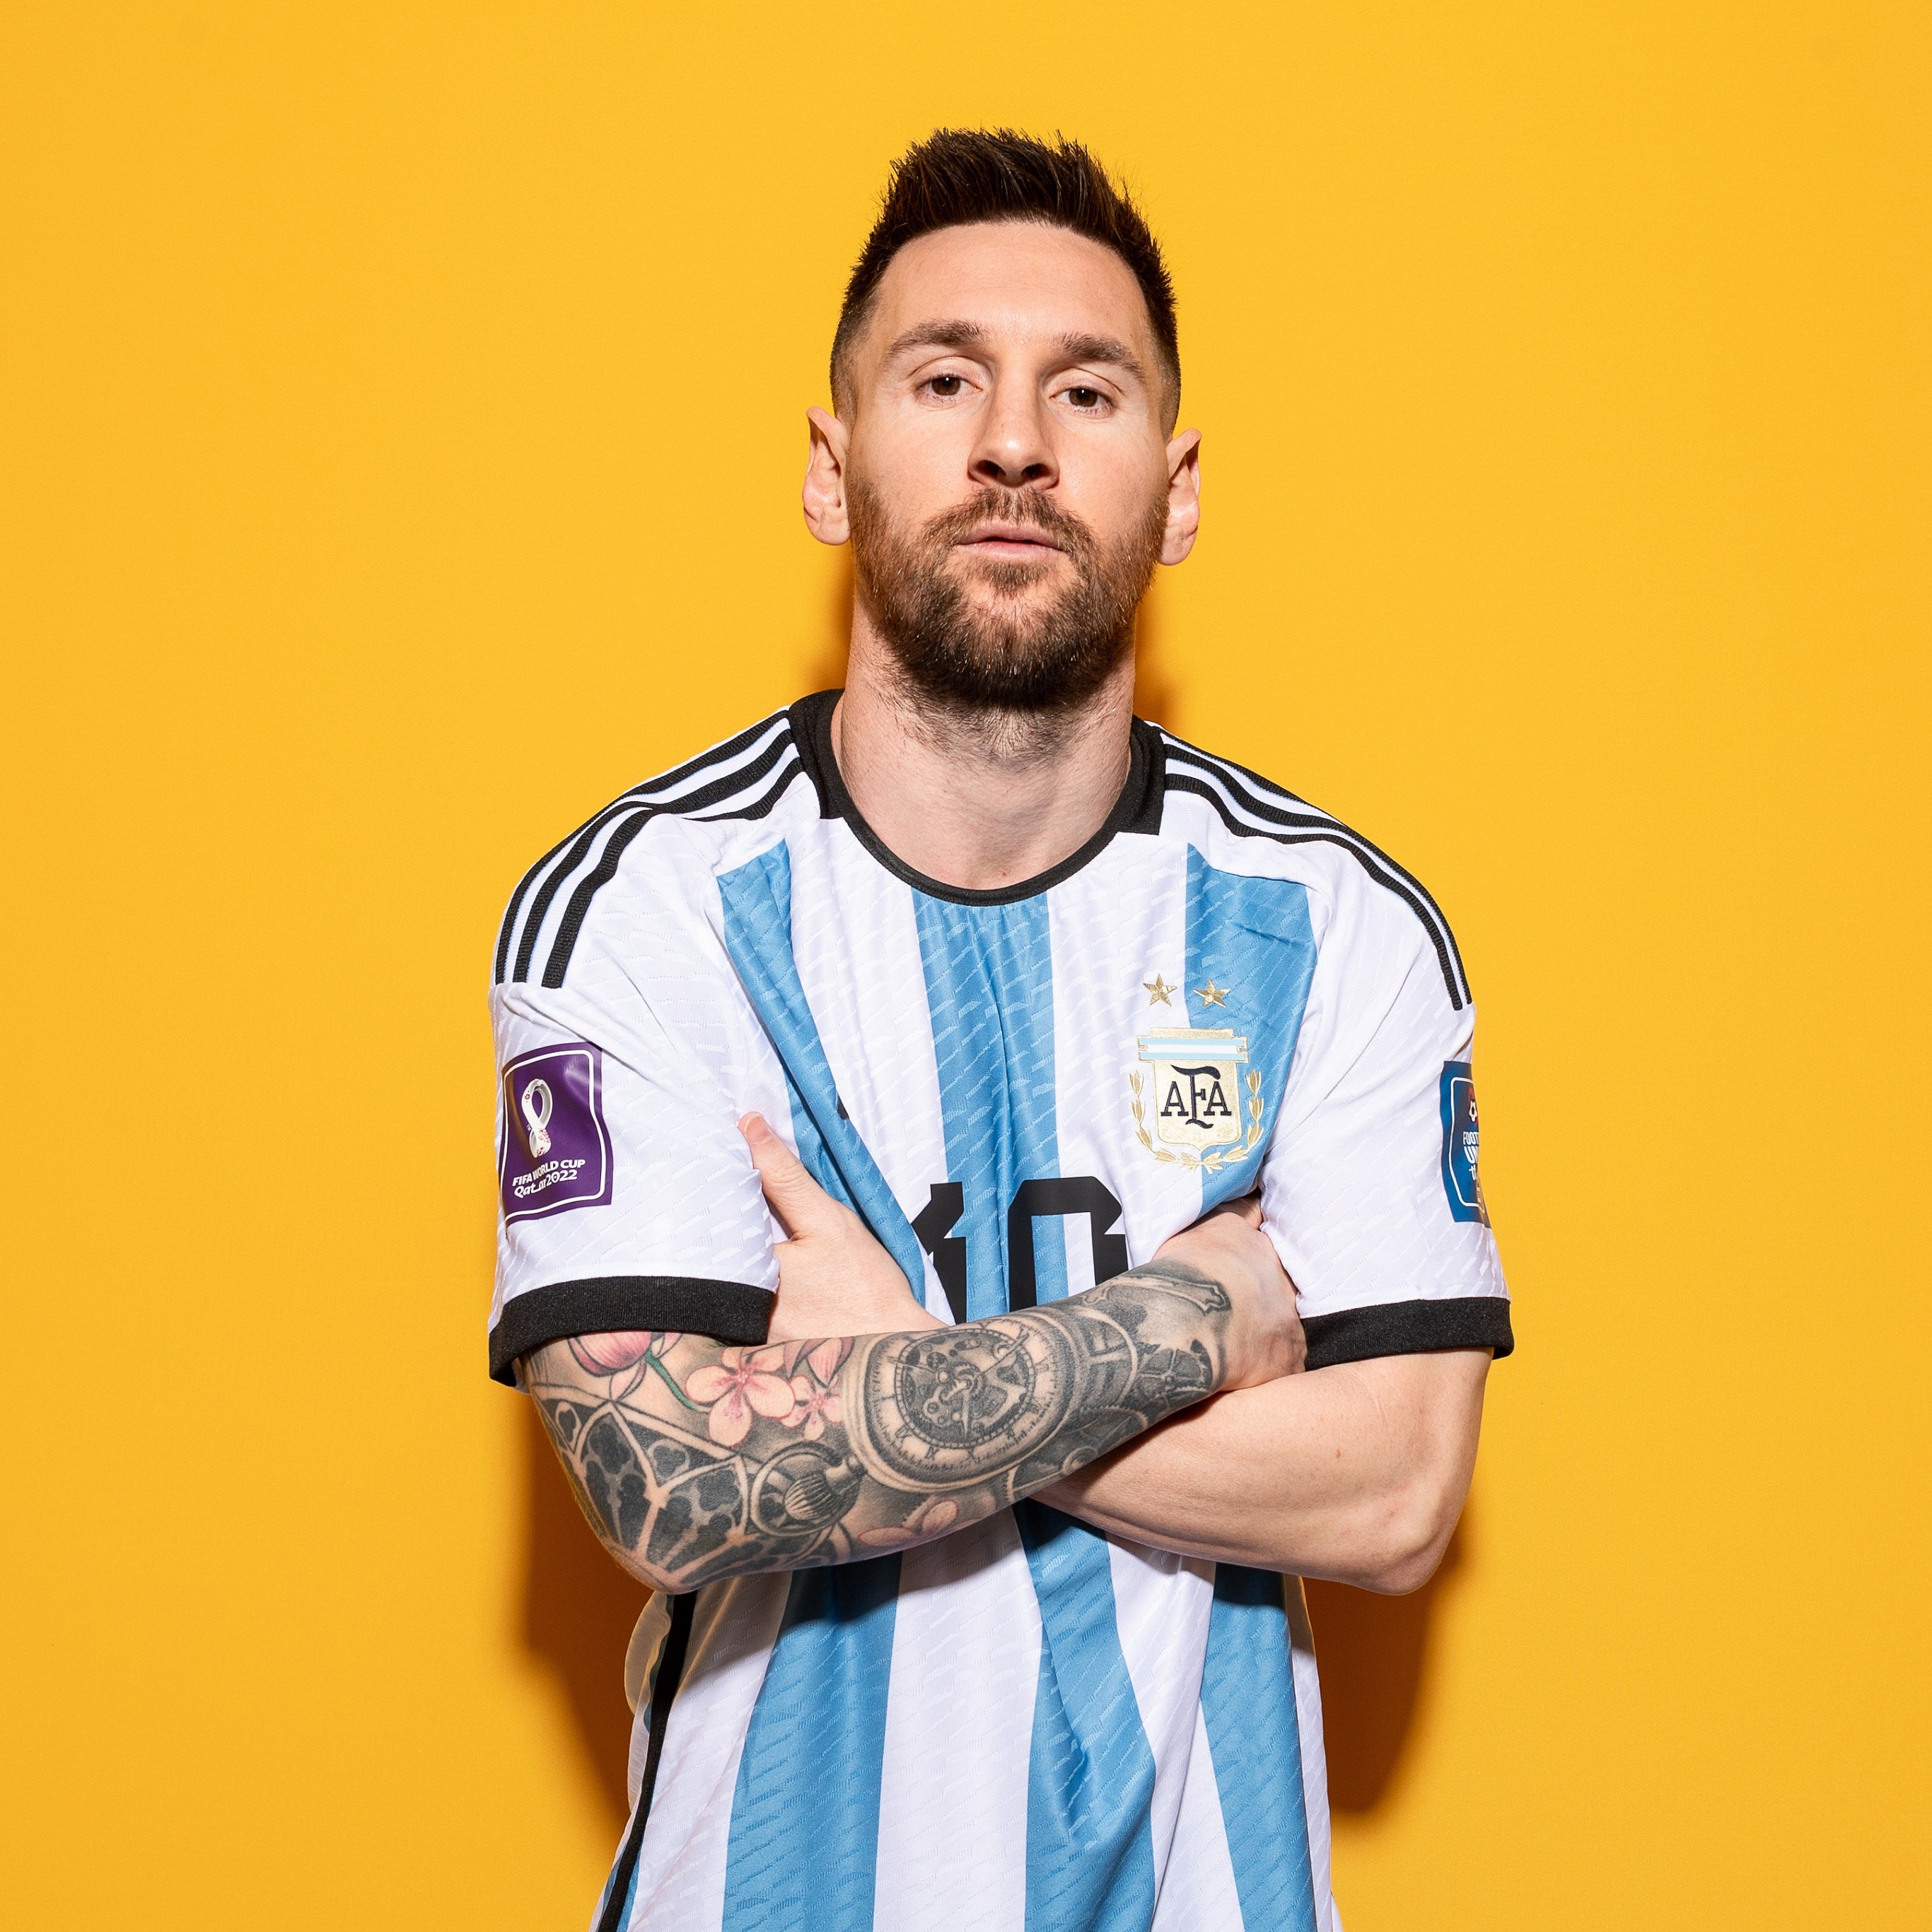 Finally Lionel Messi lifts World Cup trophy Emotions tears joy for  Argentina captains crowning achievement in potentially his last FIFA  tournament  Sporting News